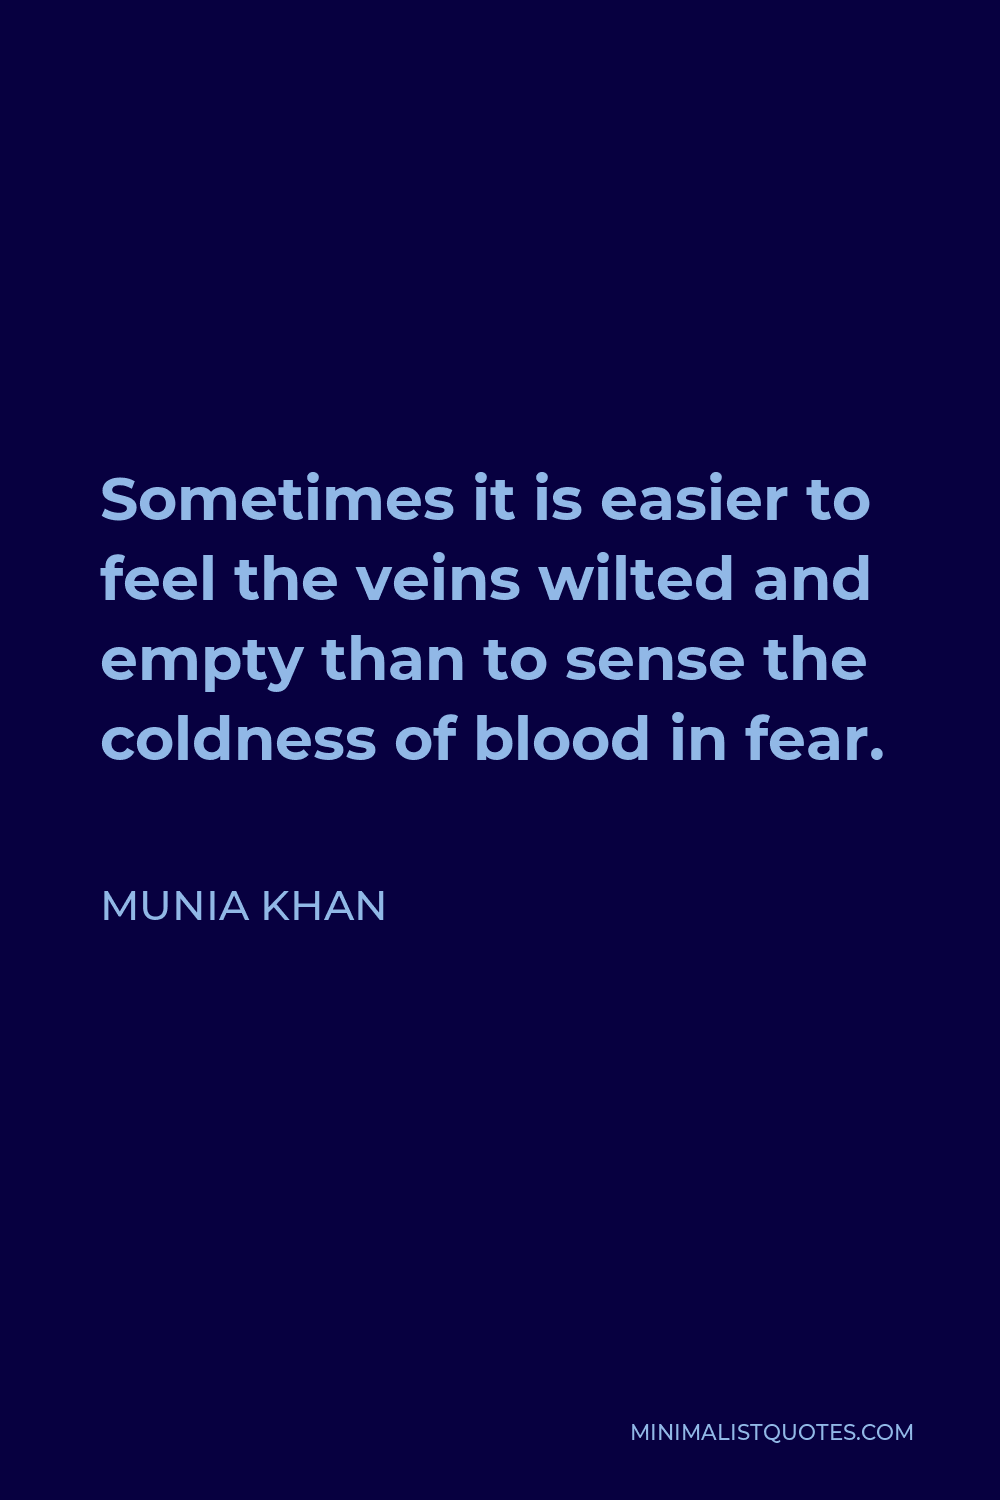 Munia Khan Quote - Sometimes it is easier to feel the veins wilted and empty than to sense the coldness of blood in fear.